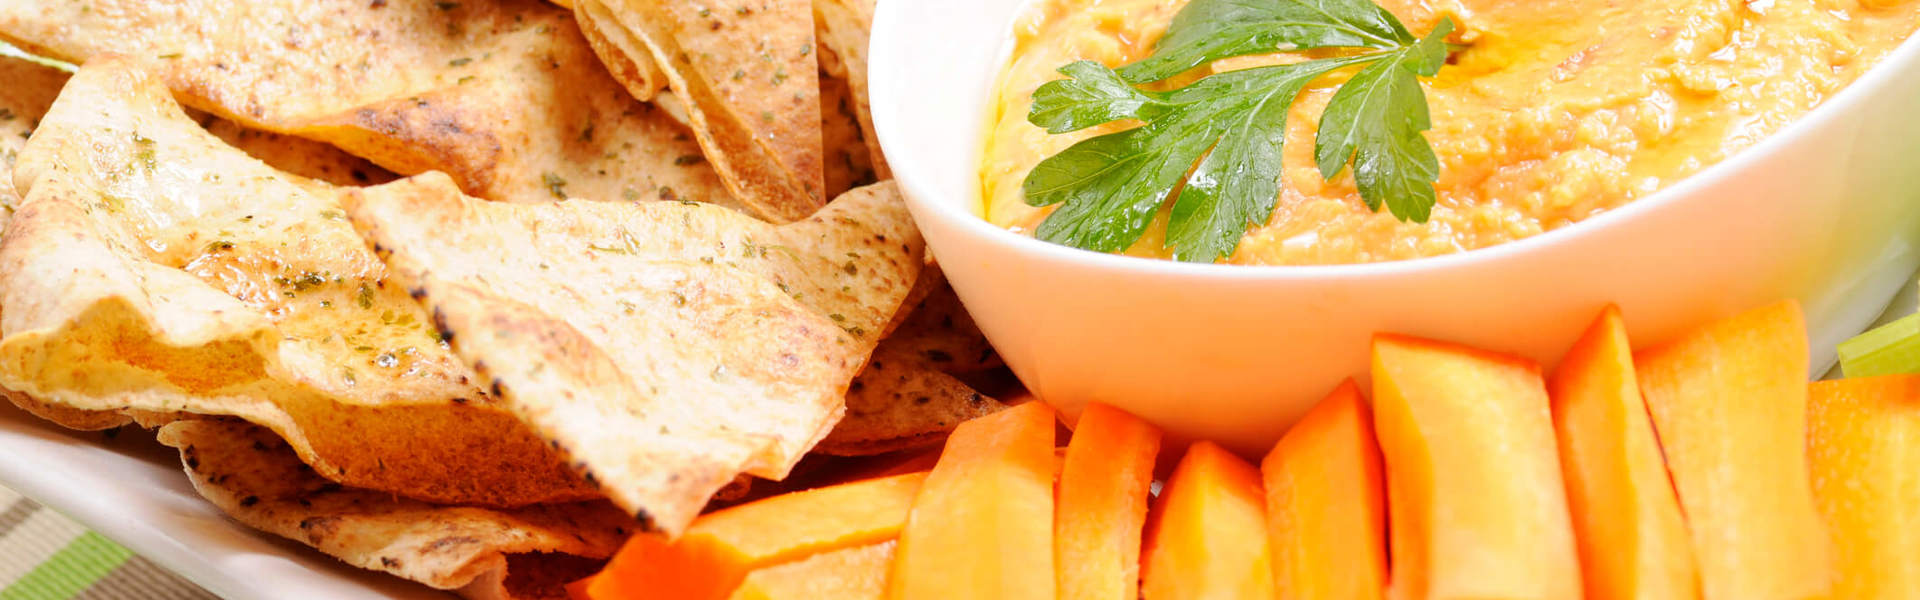 homemade hummus in a white bowl surrounded by carrot sticks and tortilla chips